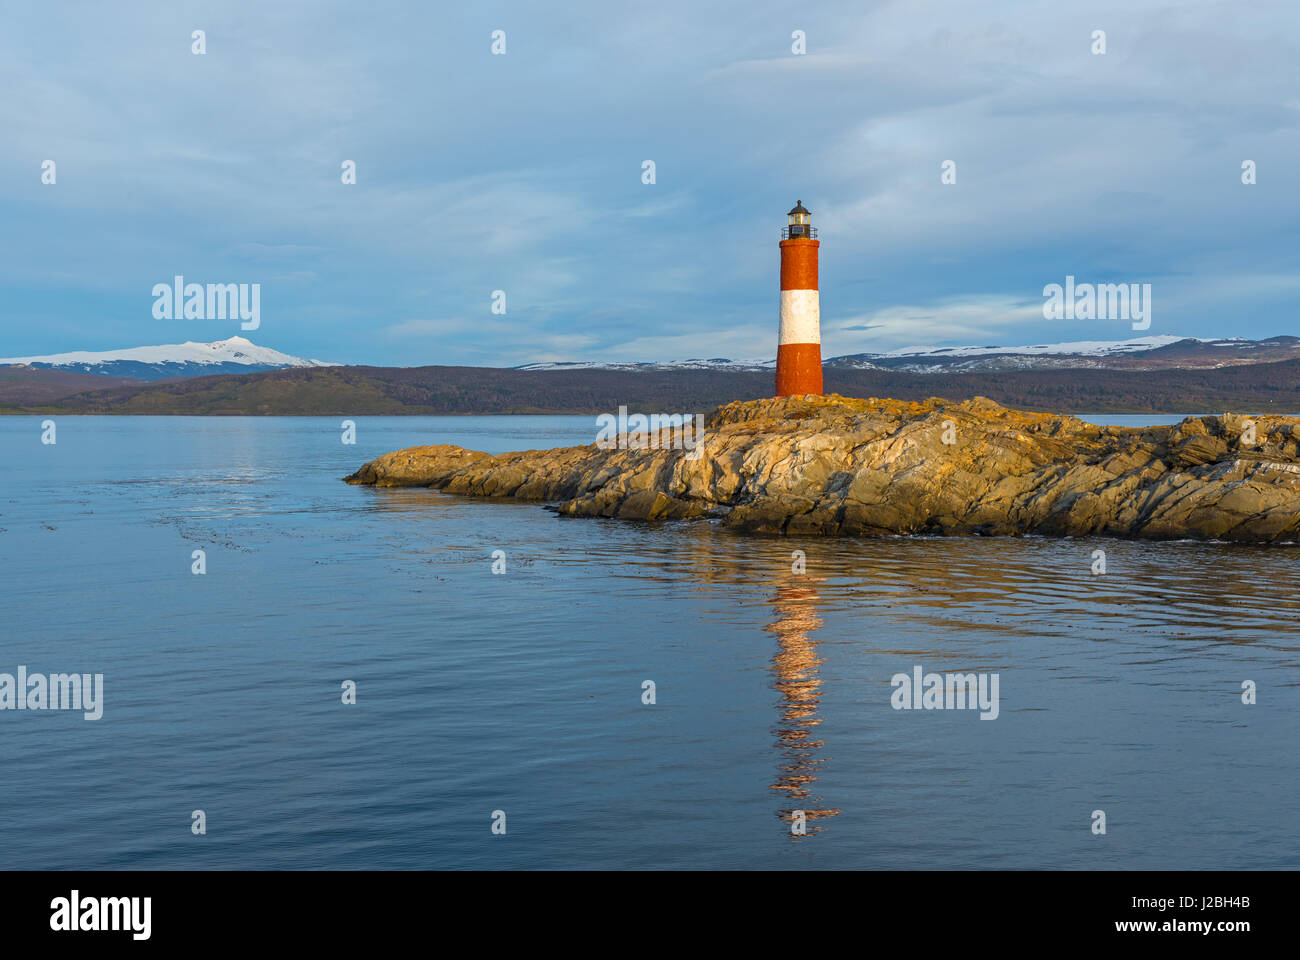 The lighthouse of Patagonia at the end of the world near Ushuaia in the Beagle Channel, Argentina. Stock Photo